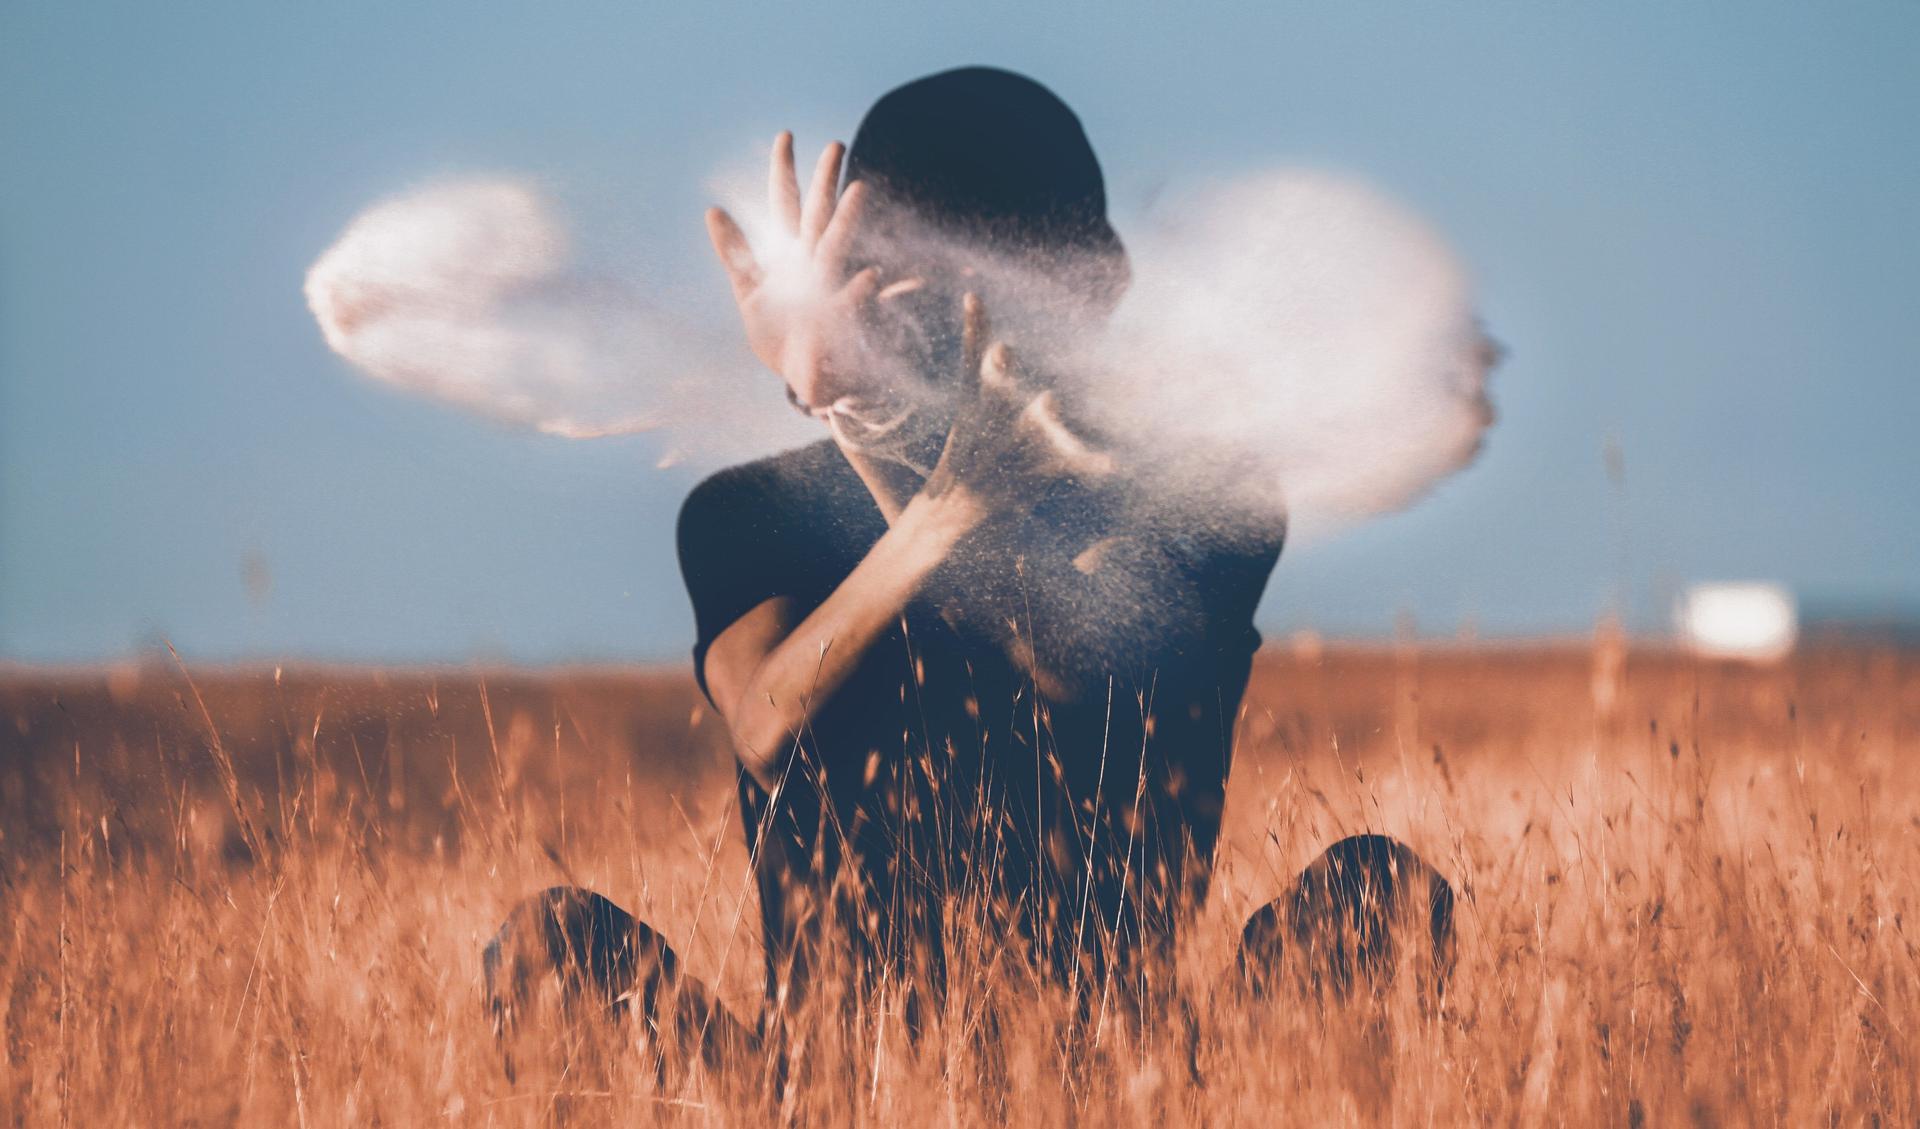 A person is sitting in a field of crops and the face is hidden behind behing a cloud of some kind of powder